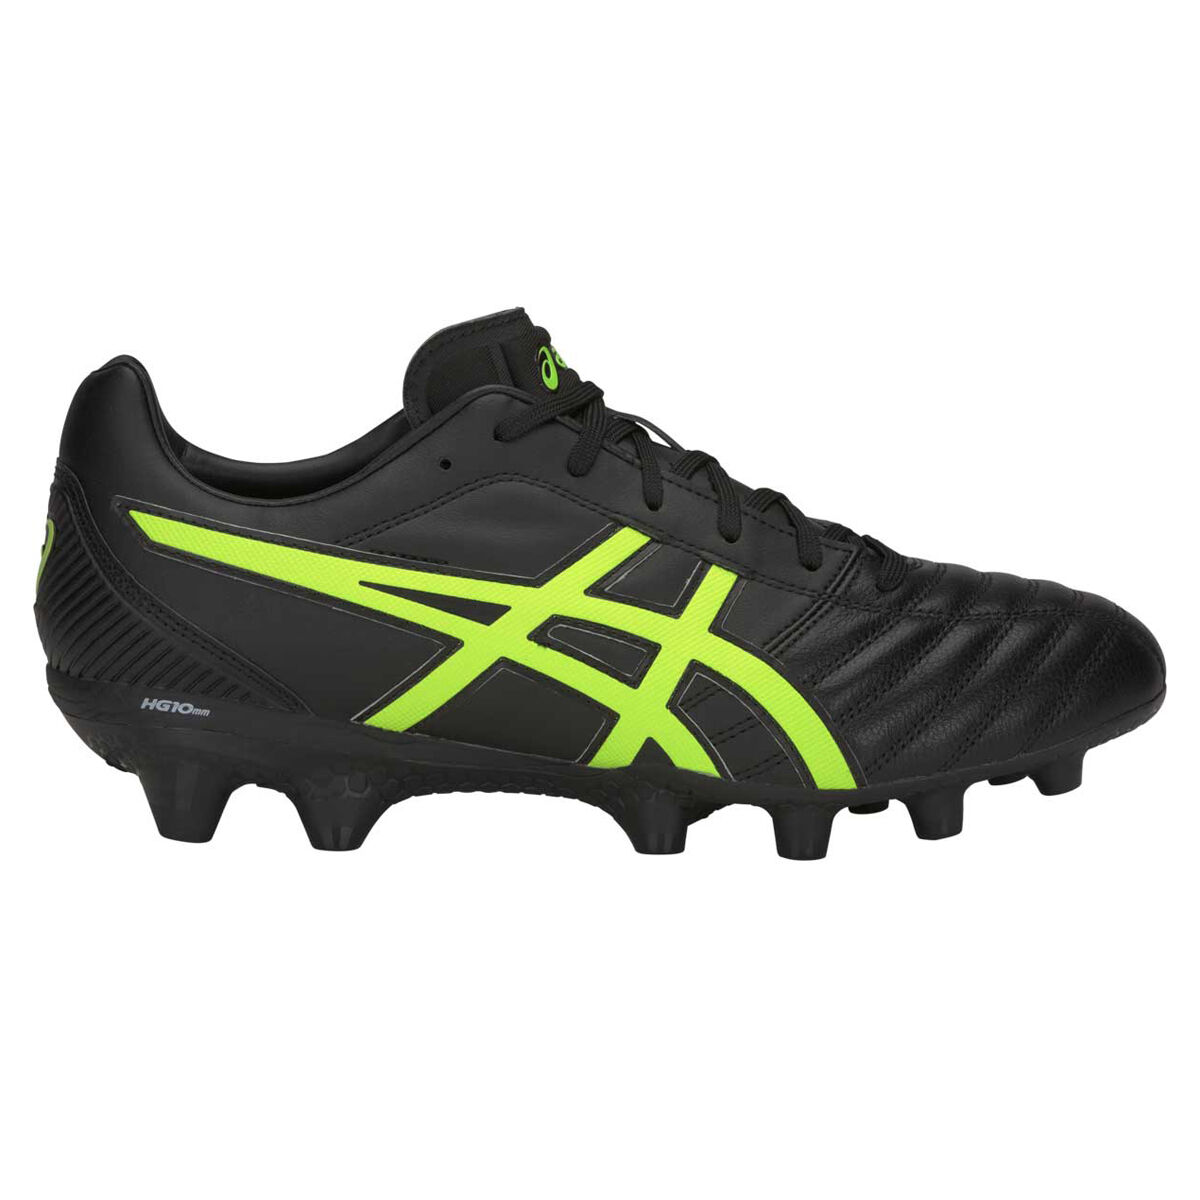 green and black asics football boots